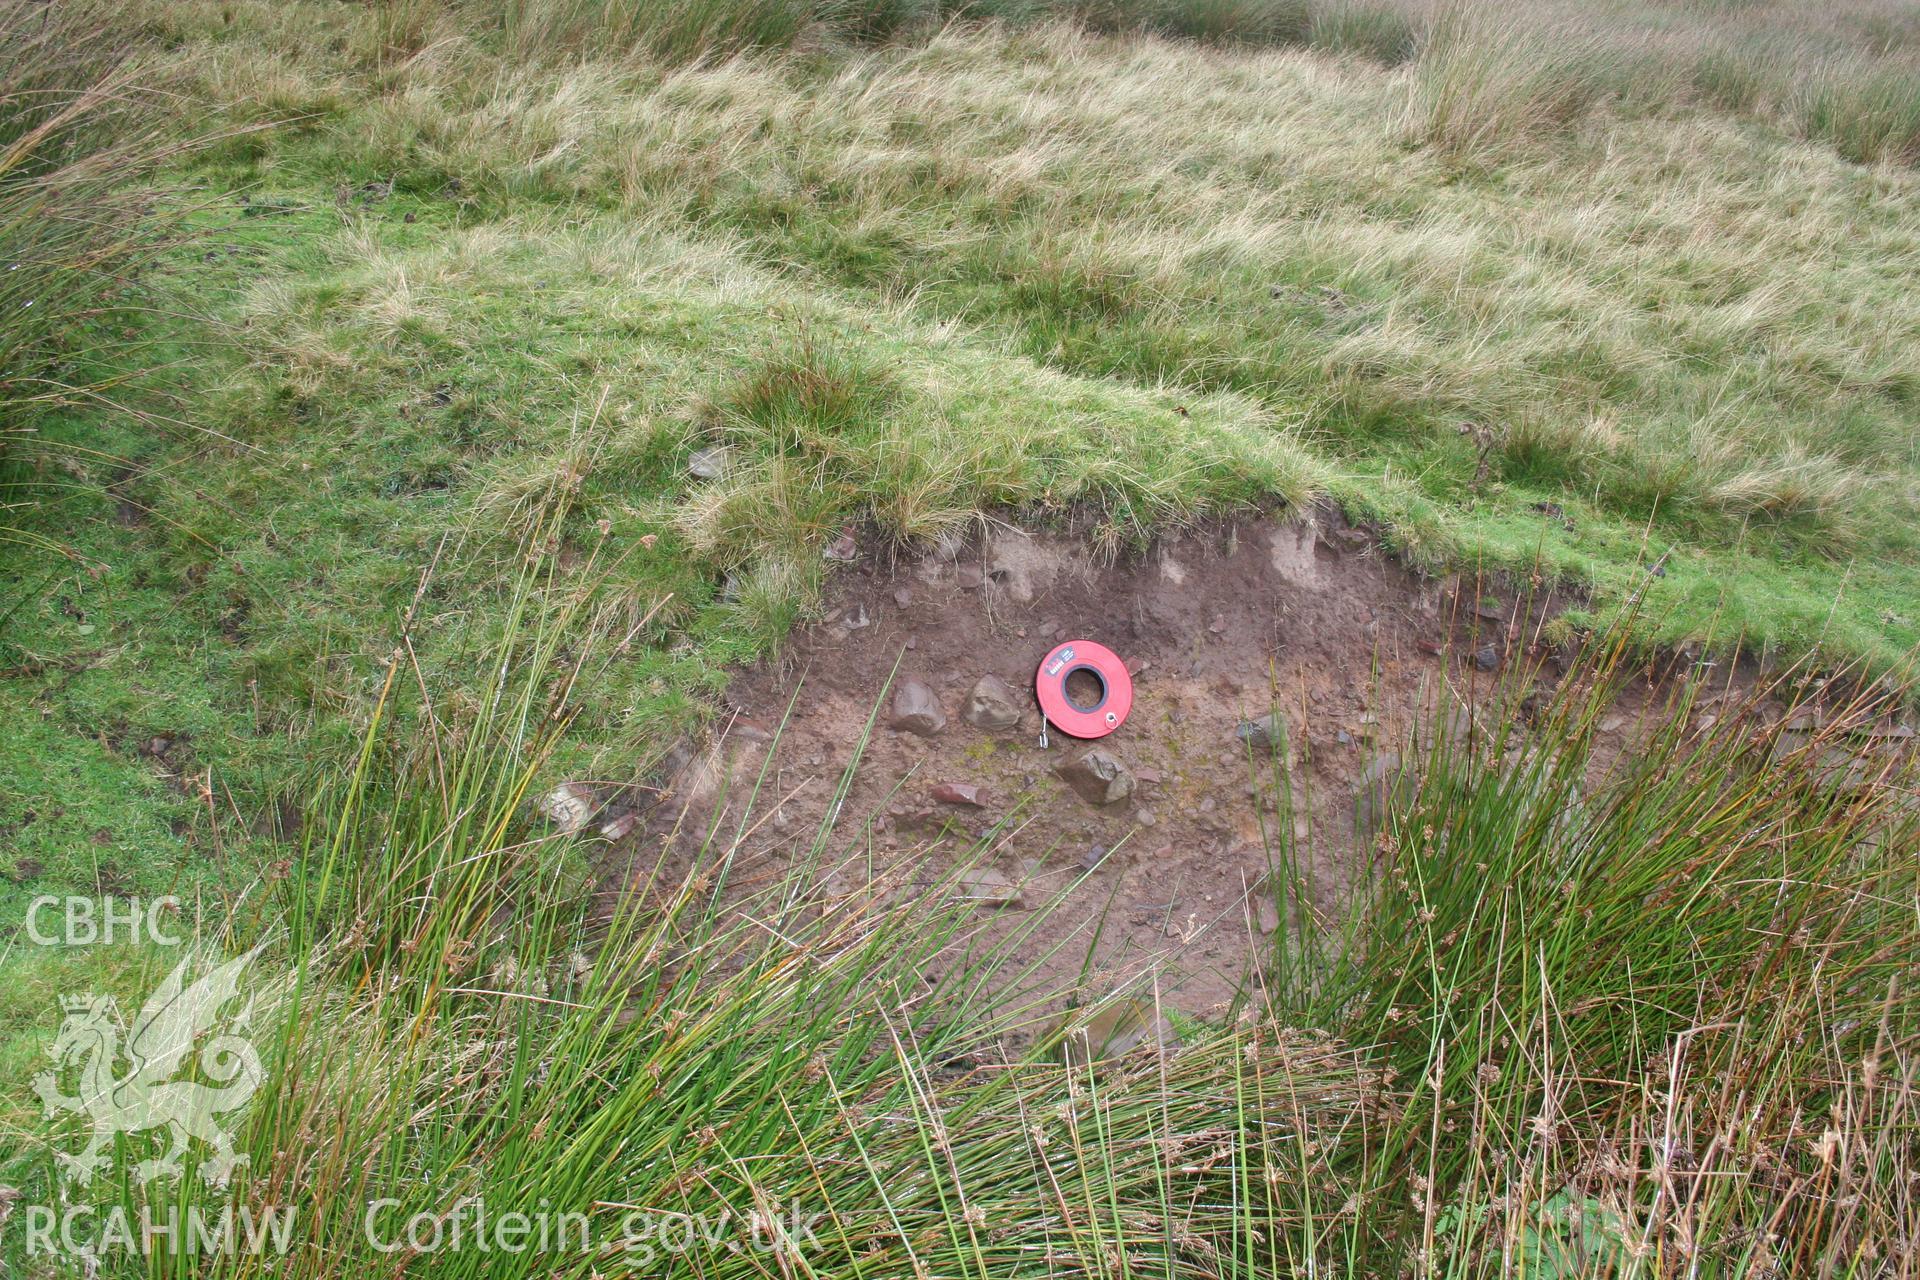 Structure of enclosure bank seen at a point where it has been cut through.